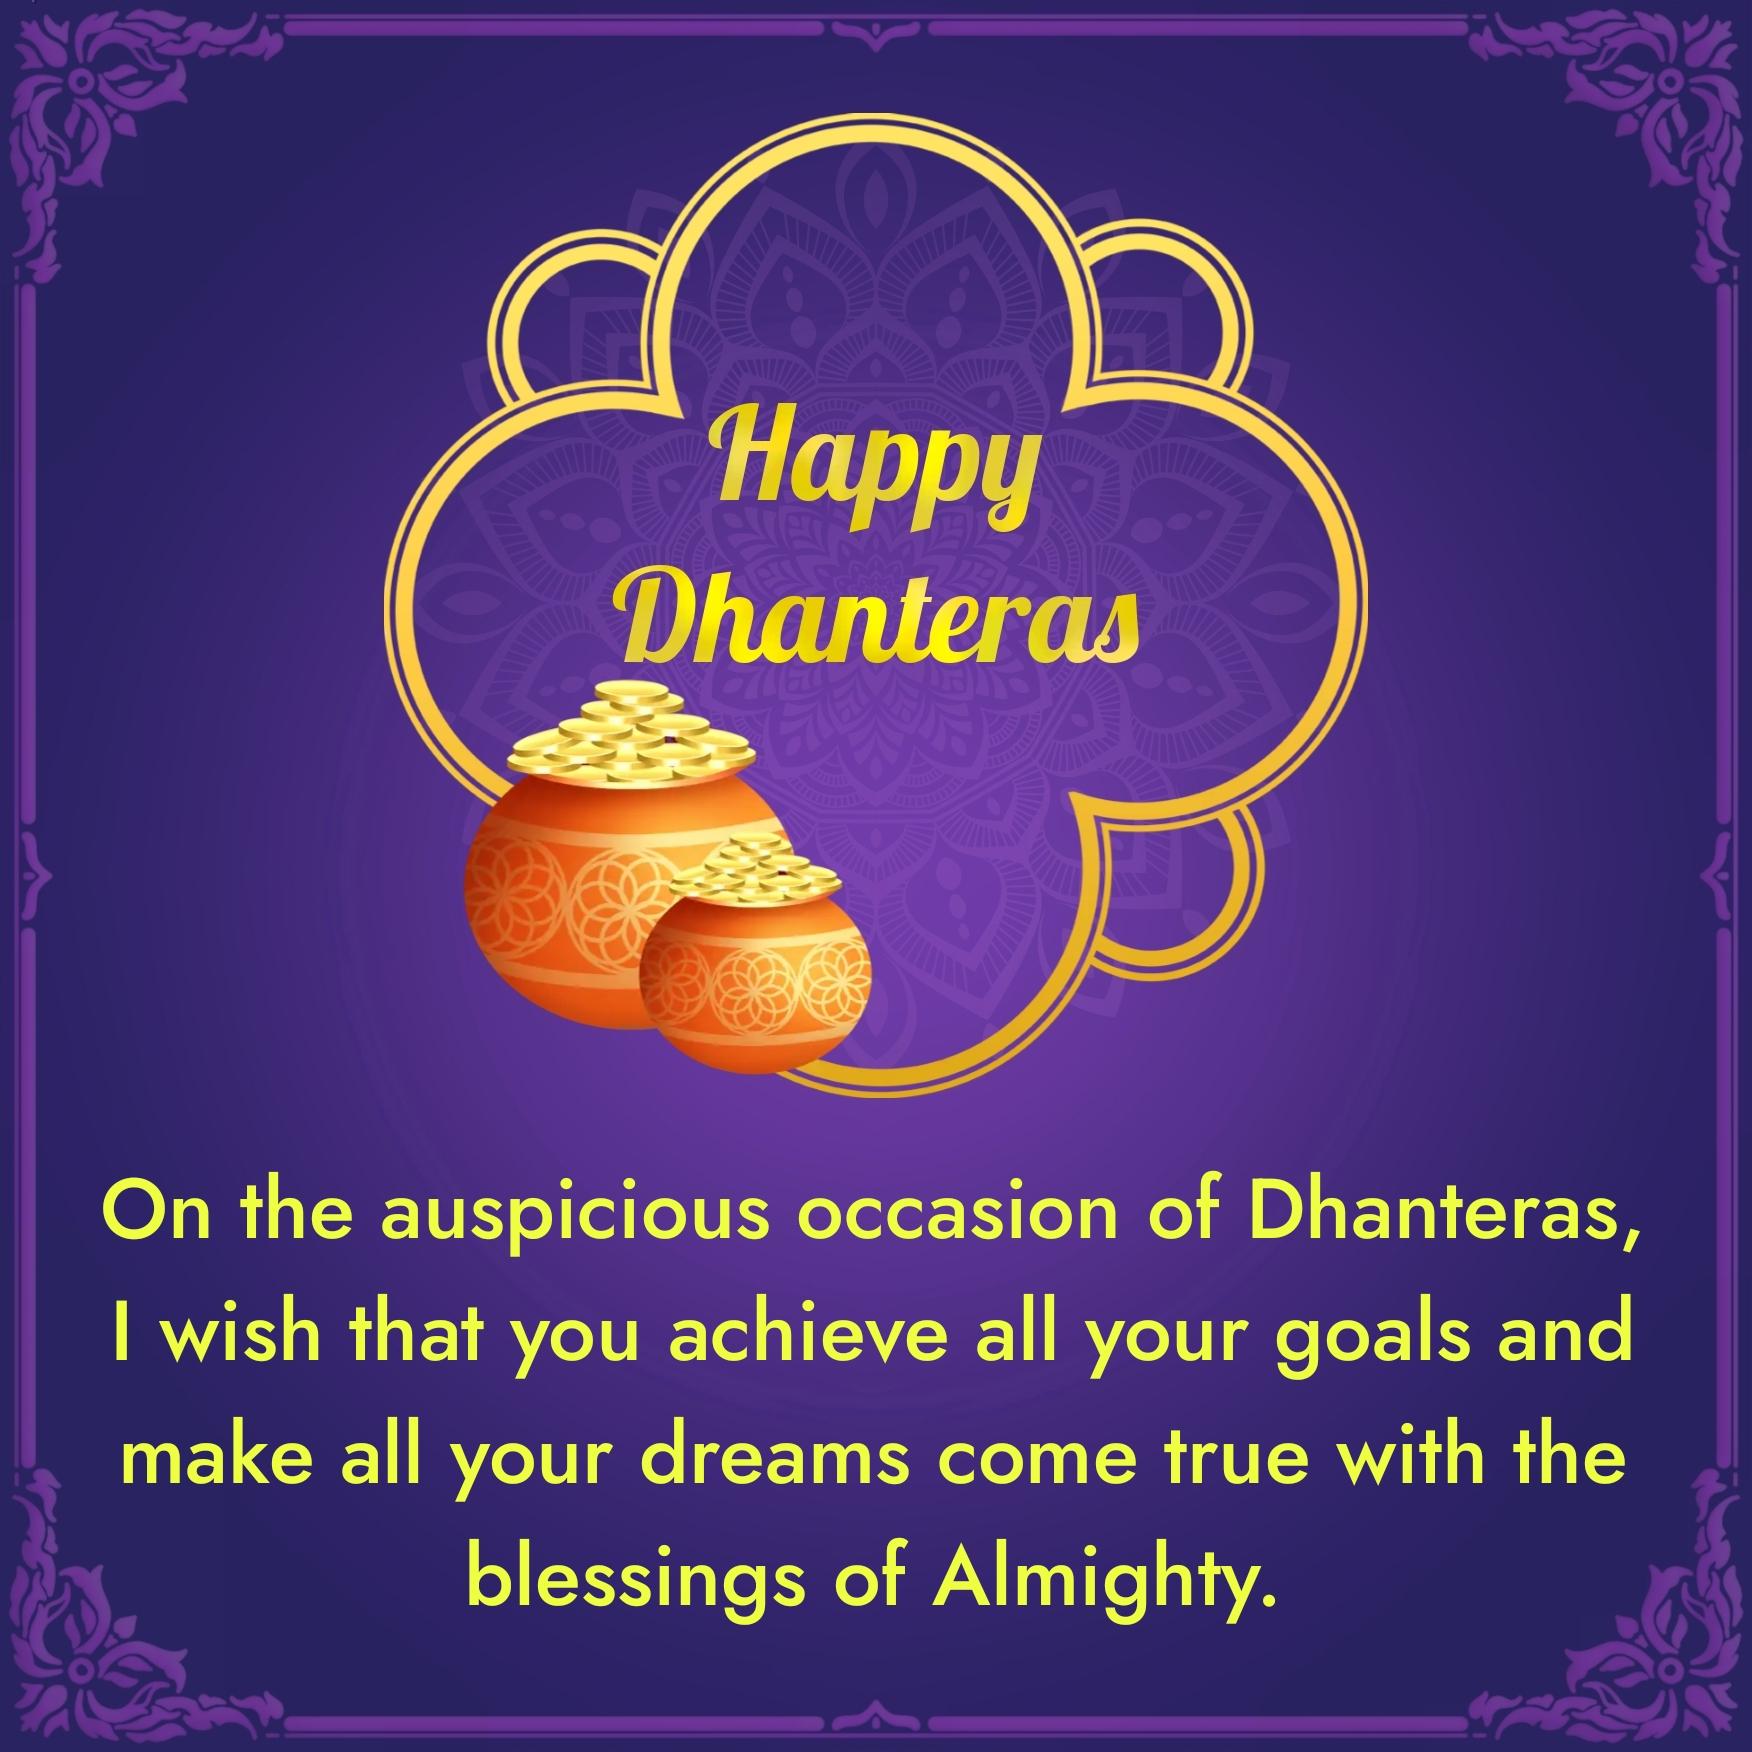 On the auspicious occasion of Dhanteras